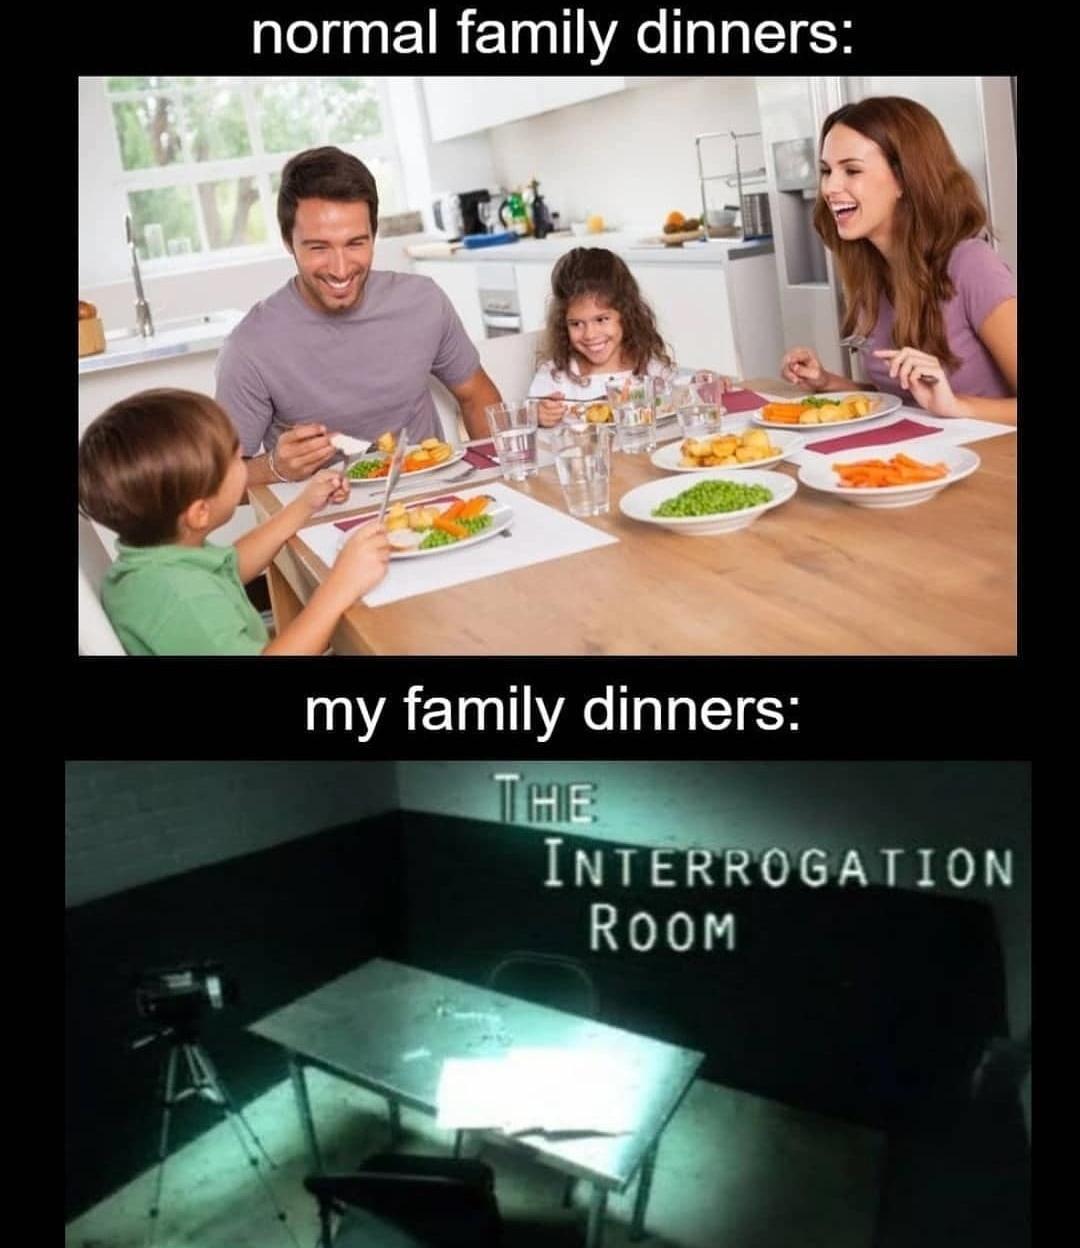 family mealtime - normal family dinners 12 Ev my family dinners The Interrogation Room